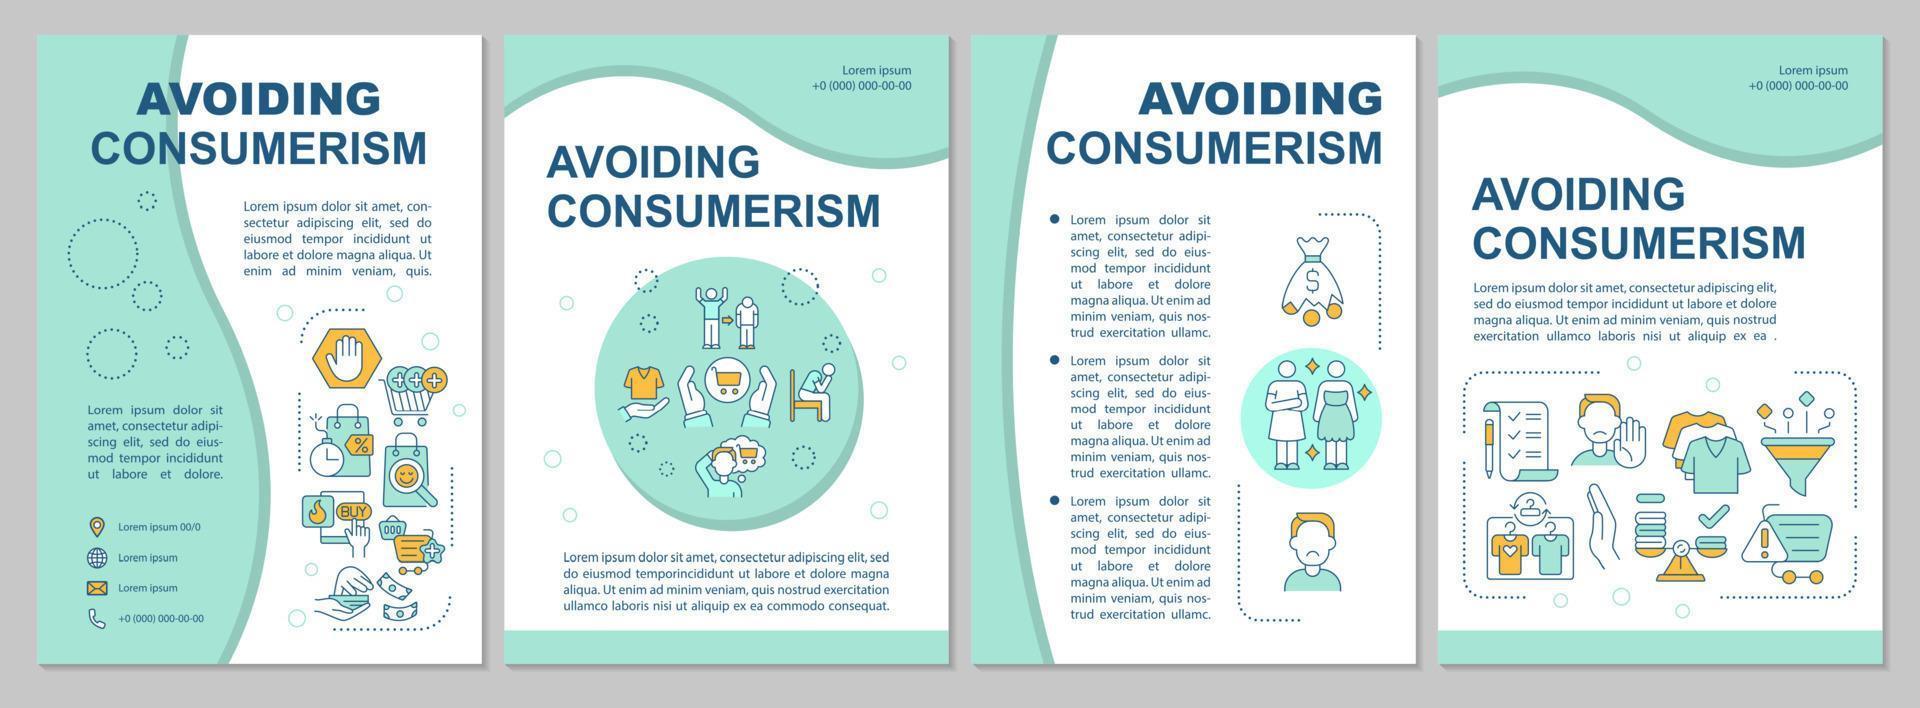 Avoiding consumerism blue brochure template. Excessive consumption. Flyer, booklet, leaflet print, cover design with linear icons. Vector layouts for presentation, annual reports, advertisement pages